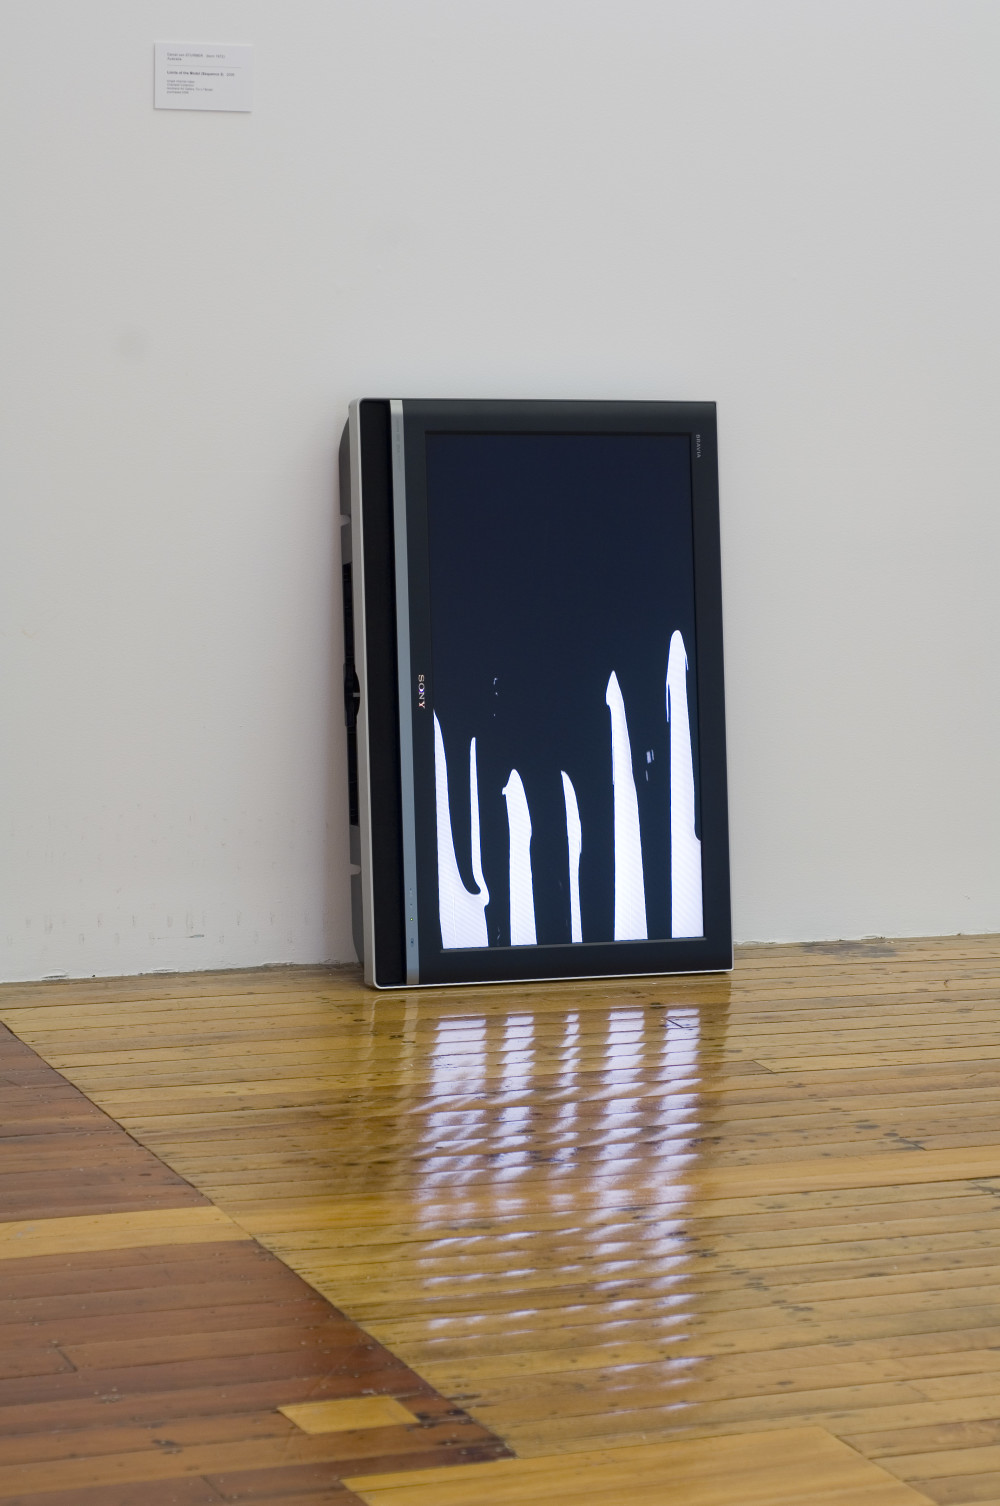 The image shows a television resting vertically against a white gallery wall and a polished wooden floor. Black paint appears to drip further and further down the white screen until it almost covers it. The reflection of the screen can be seen in the floor below. 